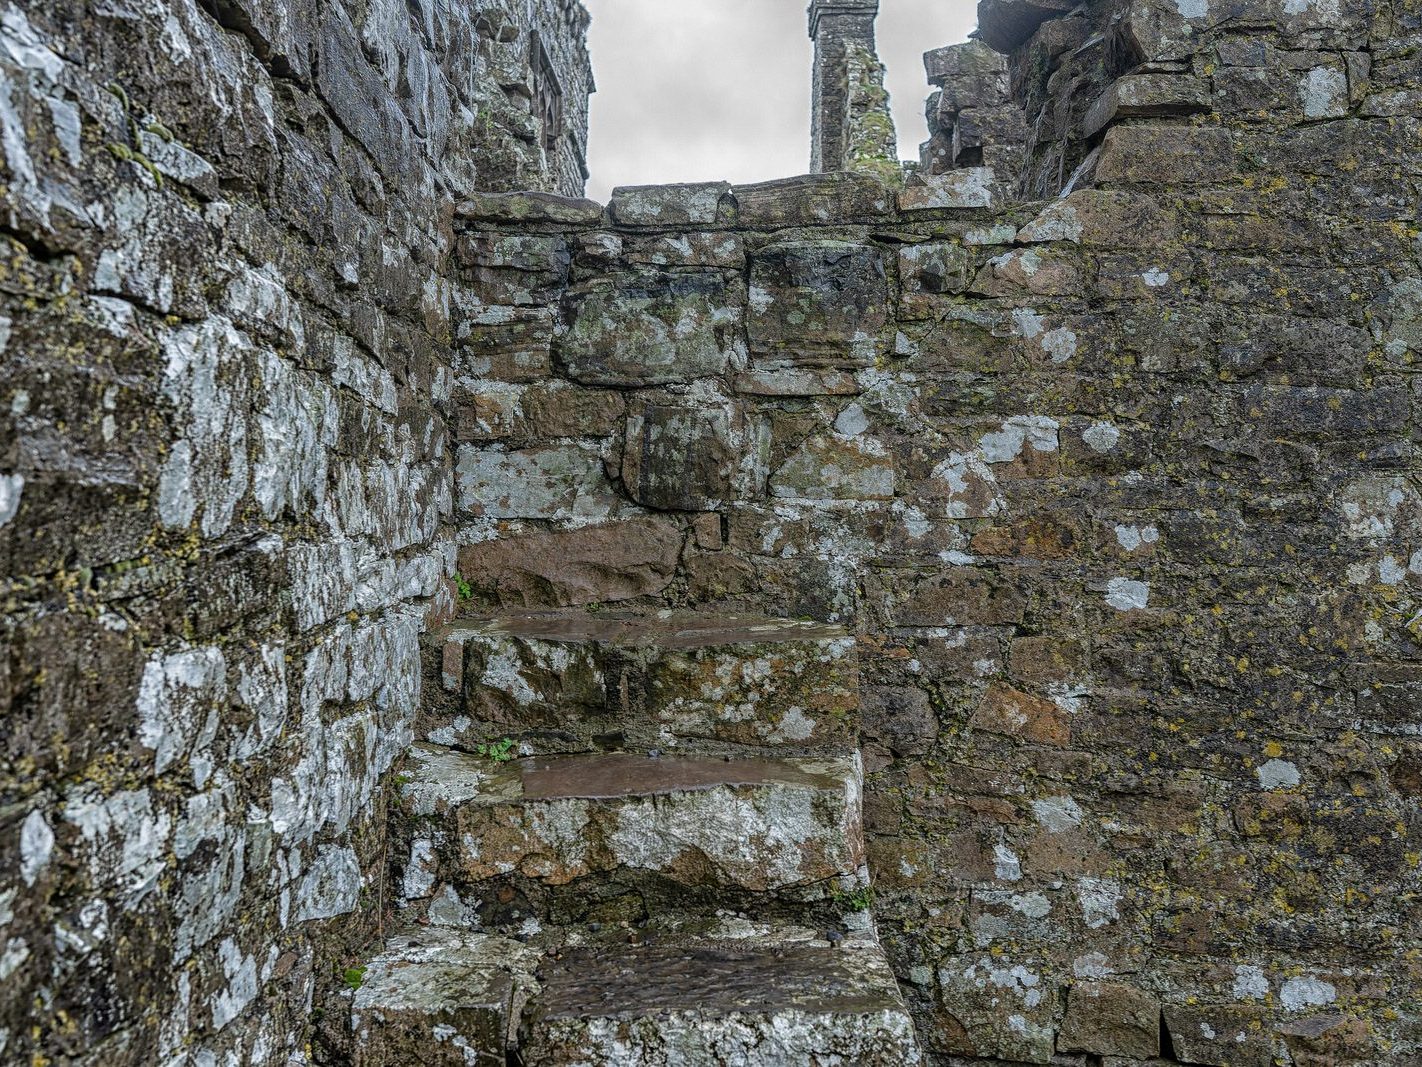 BECTIVE ABBEY WHICH I VISITED LAST CHRISTMAS [THERE WERE NO OTHER VISITORS AS IT WAS A VERY WET DAY]--225252-1